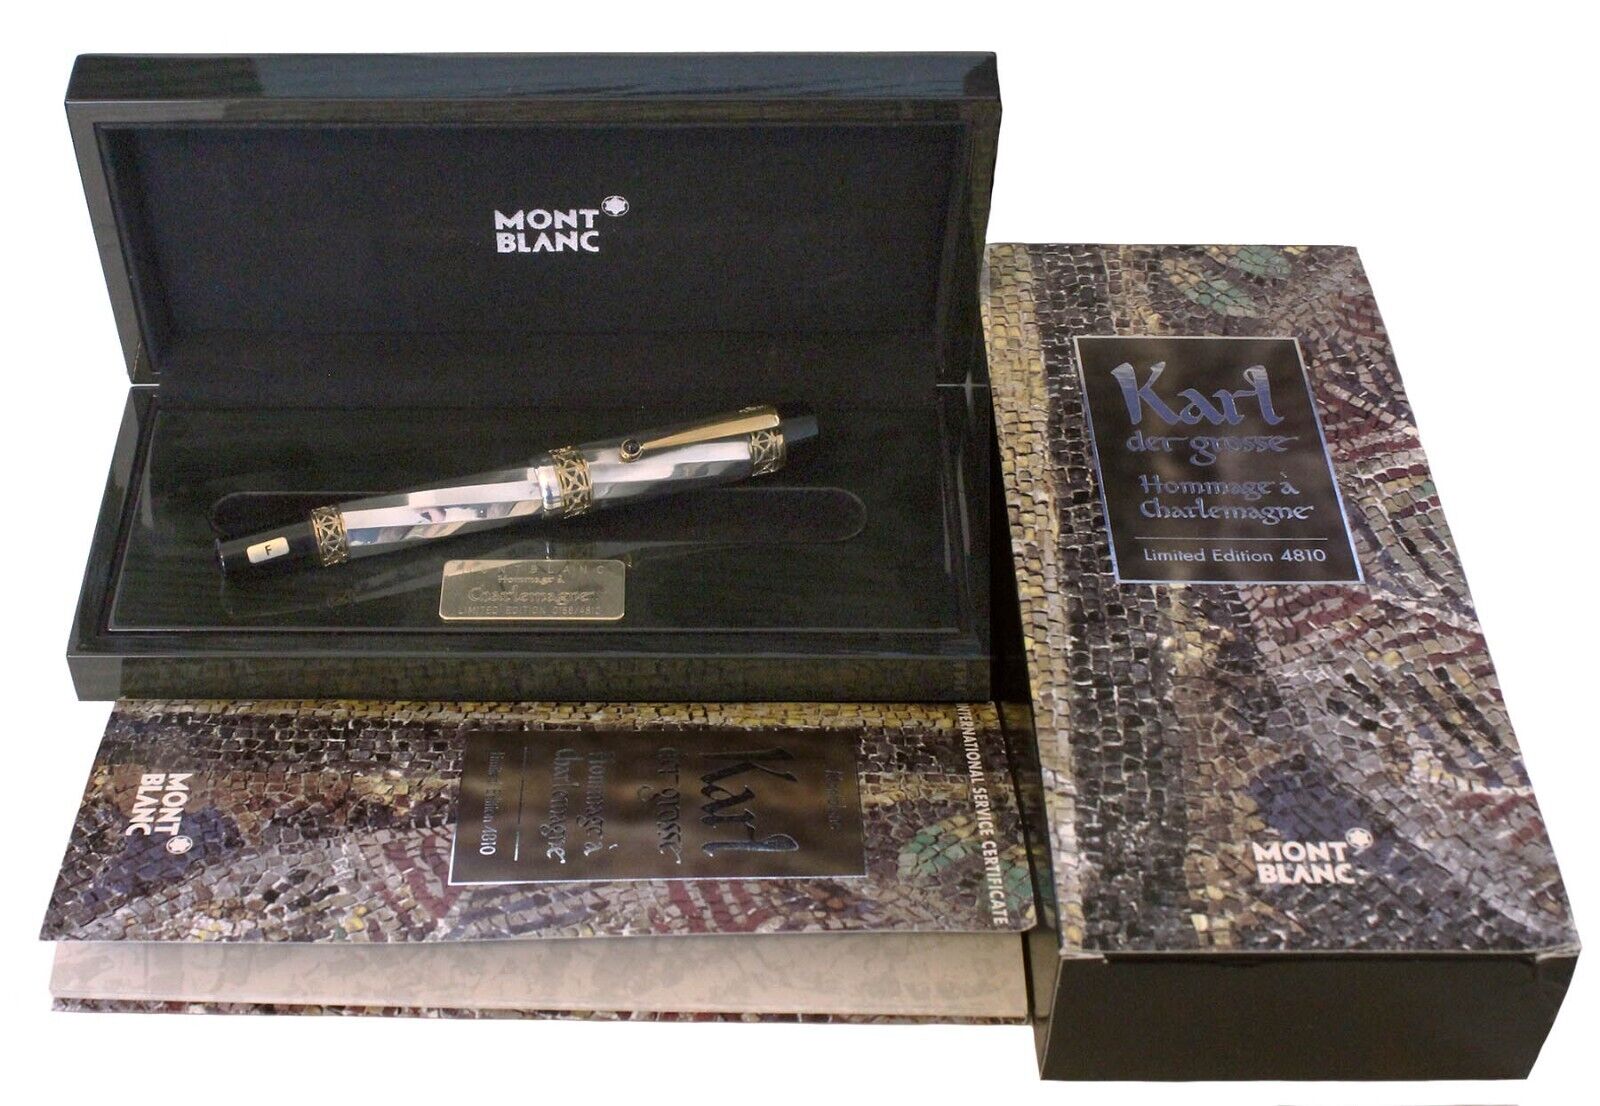 2000 MONTBLANC KARL DER GROSSE PATRON OF THE ART LIMITED EDITION FOUNTAIN PEN